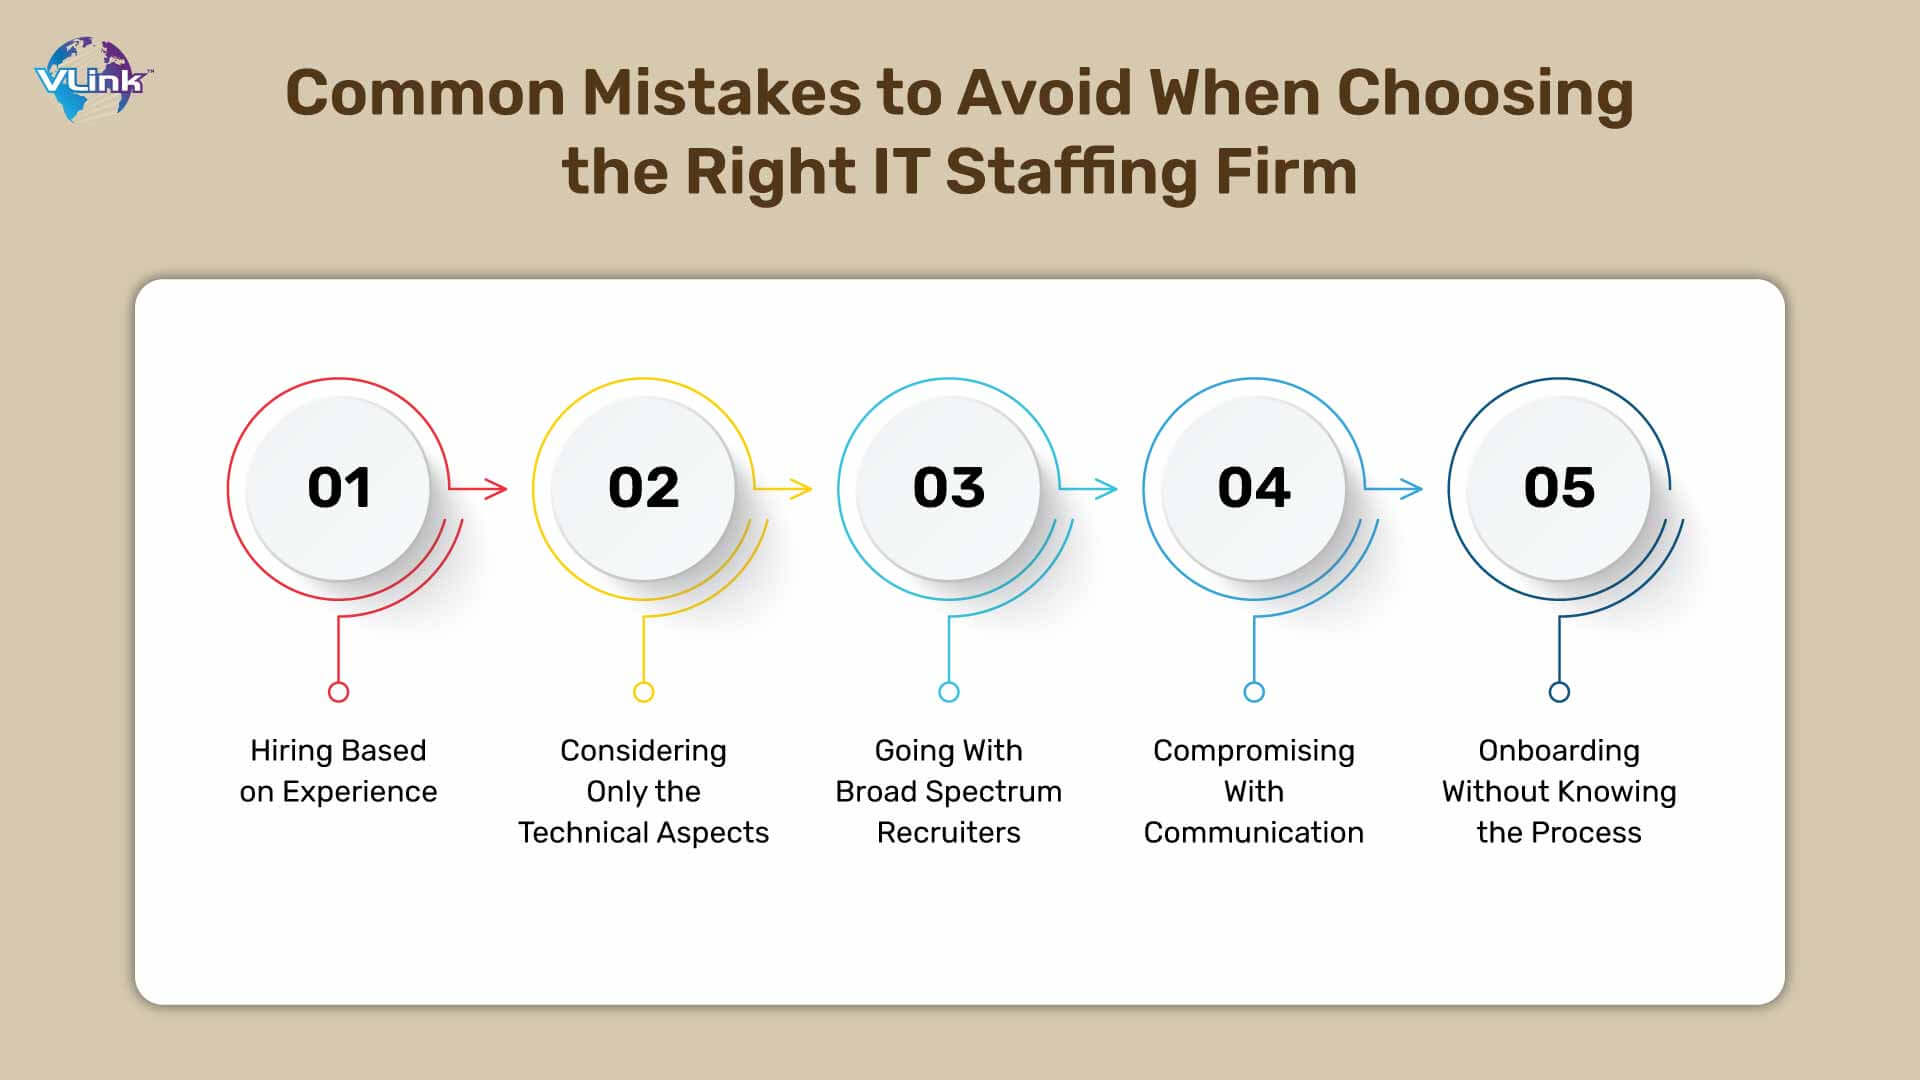 Common Mistakes to Avoid When Choosing the Right IT Staffing Firm